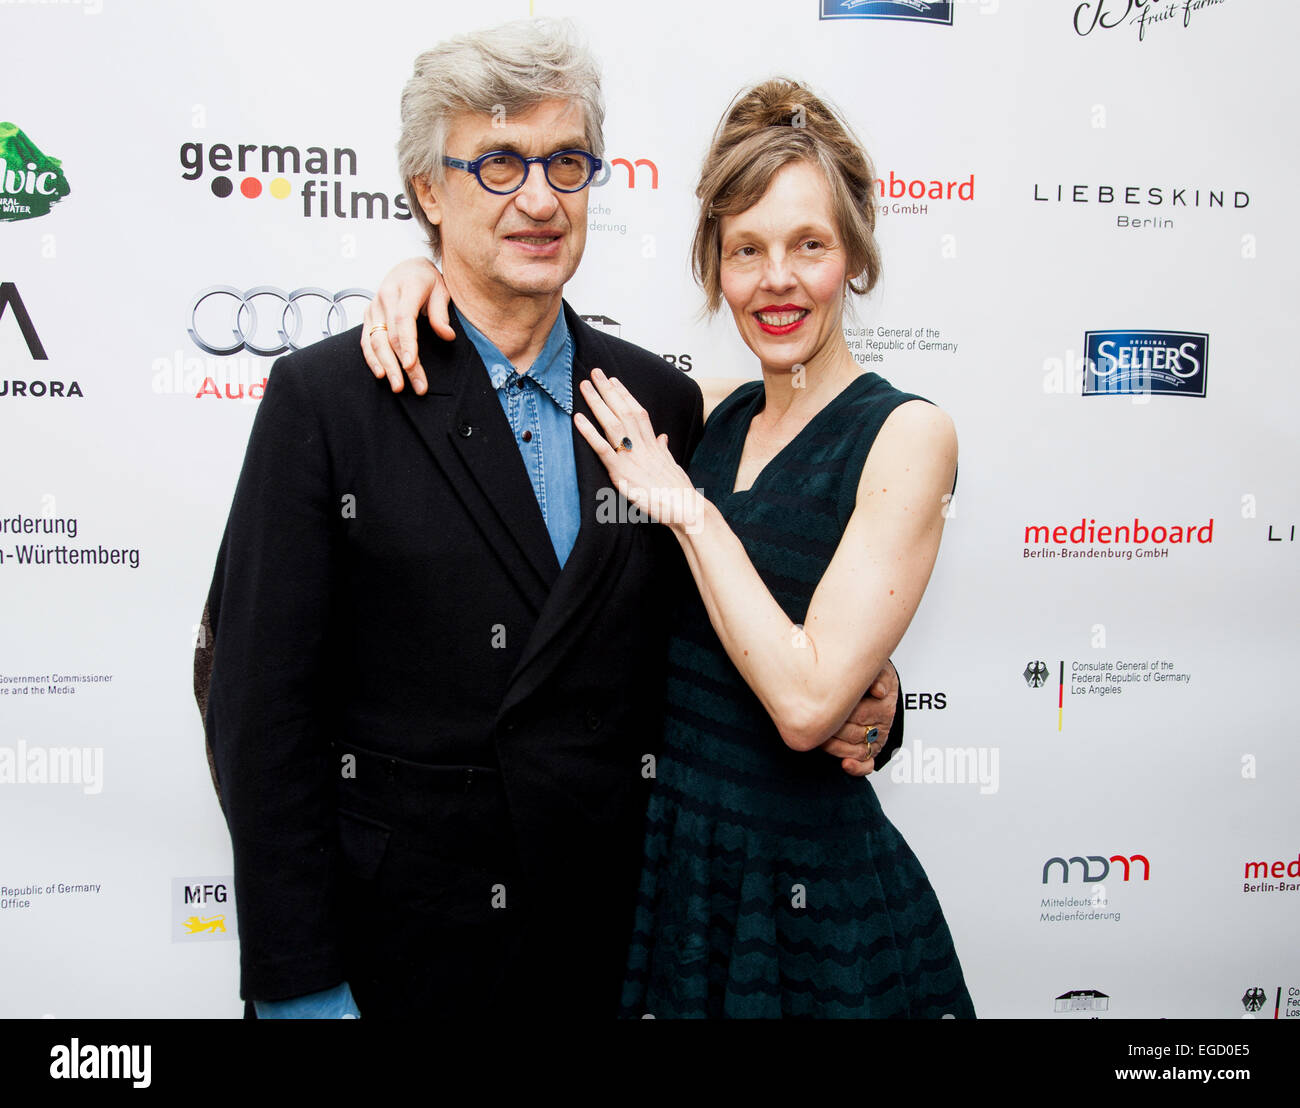 Wim Wenders and Donata Wenders at the German Films and the Consulate General of the Federal Republic Of Germany's German Oscar nominees reception held at Villa Aurora in Pacific Palisades on February 21, 2015. Credit: Flaminia Fanale/Lumeimages.com Stock Photo